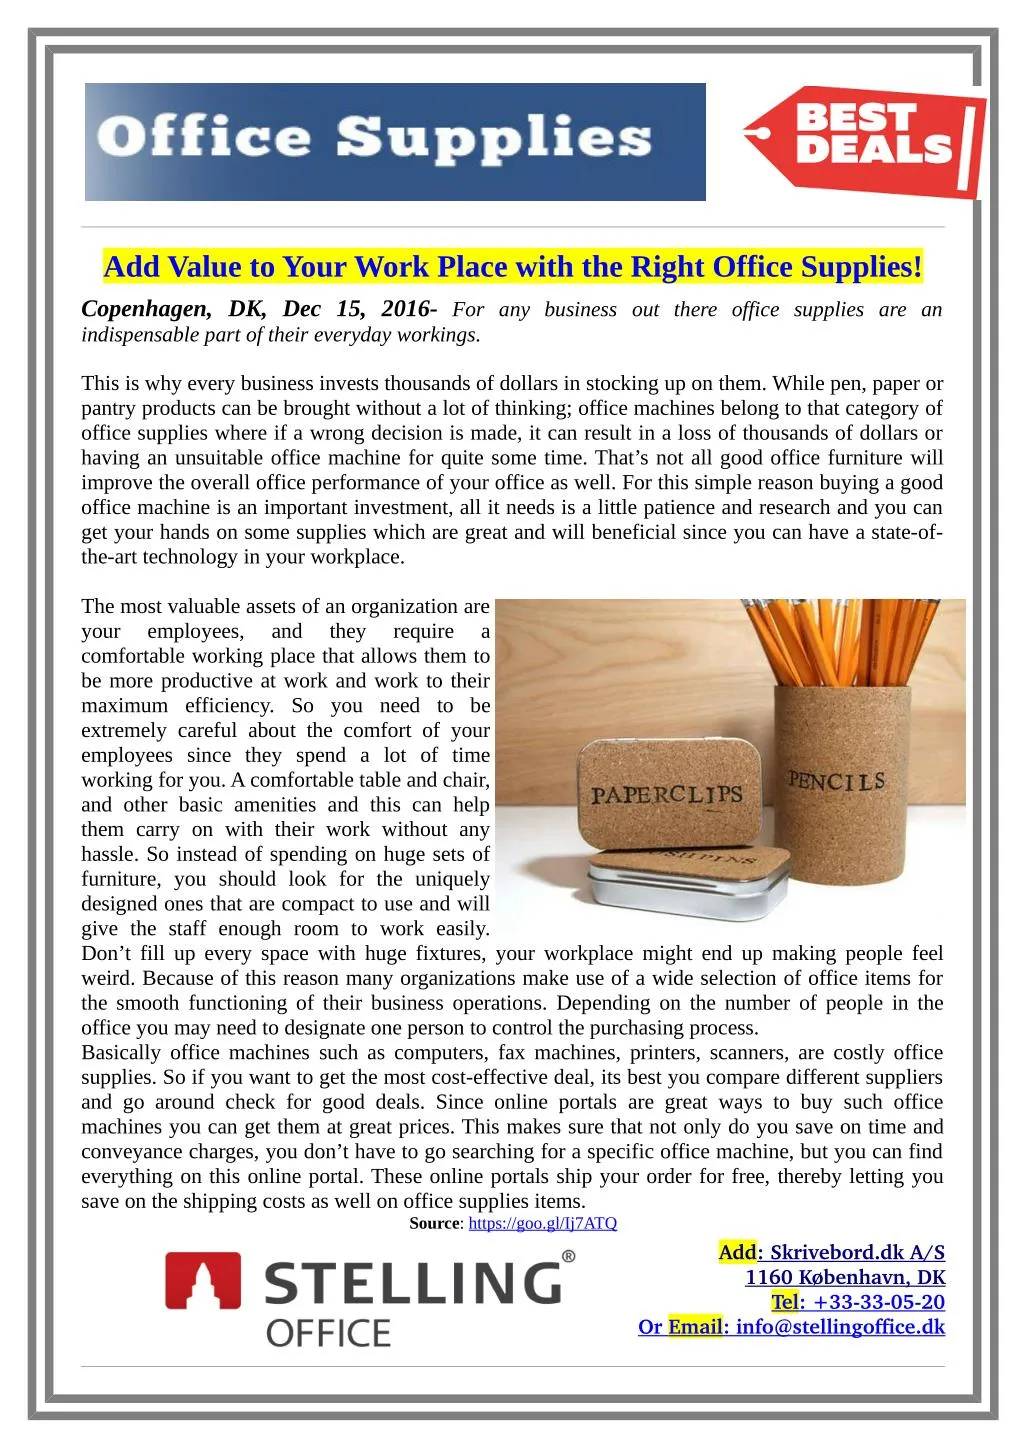 add value to your work place with the right